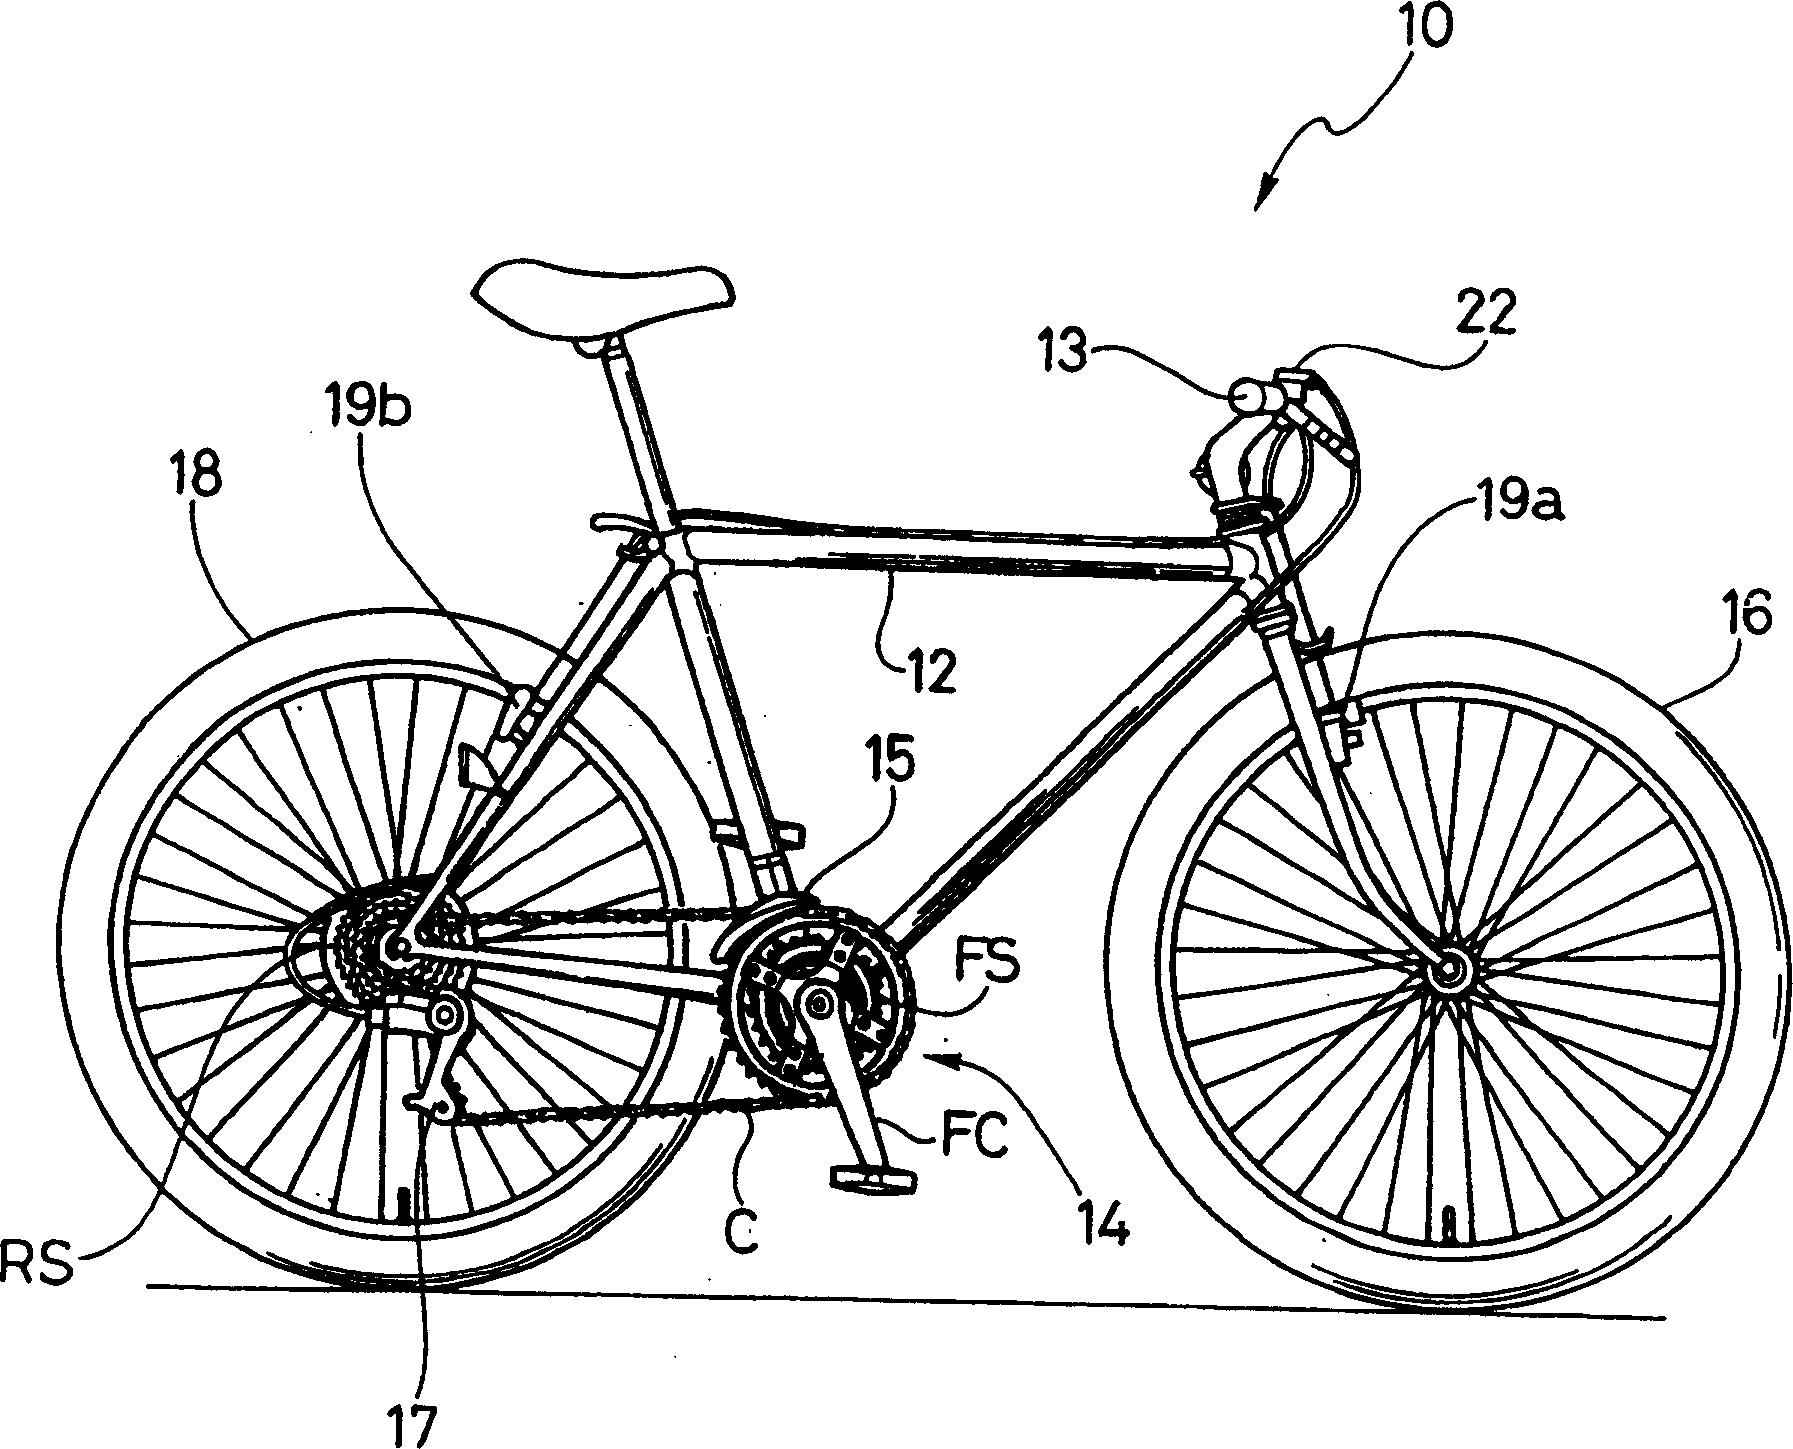 Bicycle gear controller for bicycle driving gear